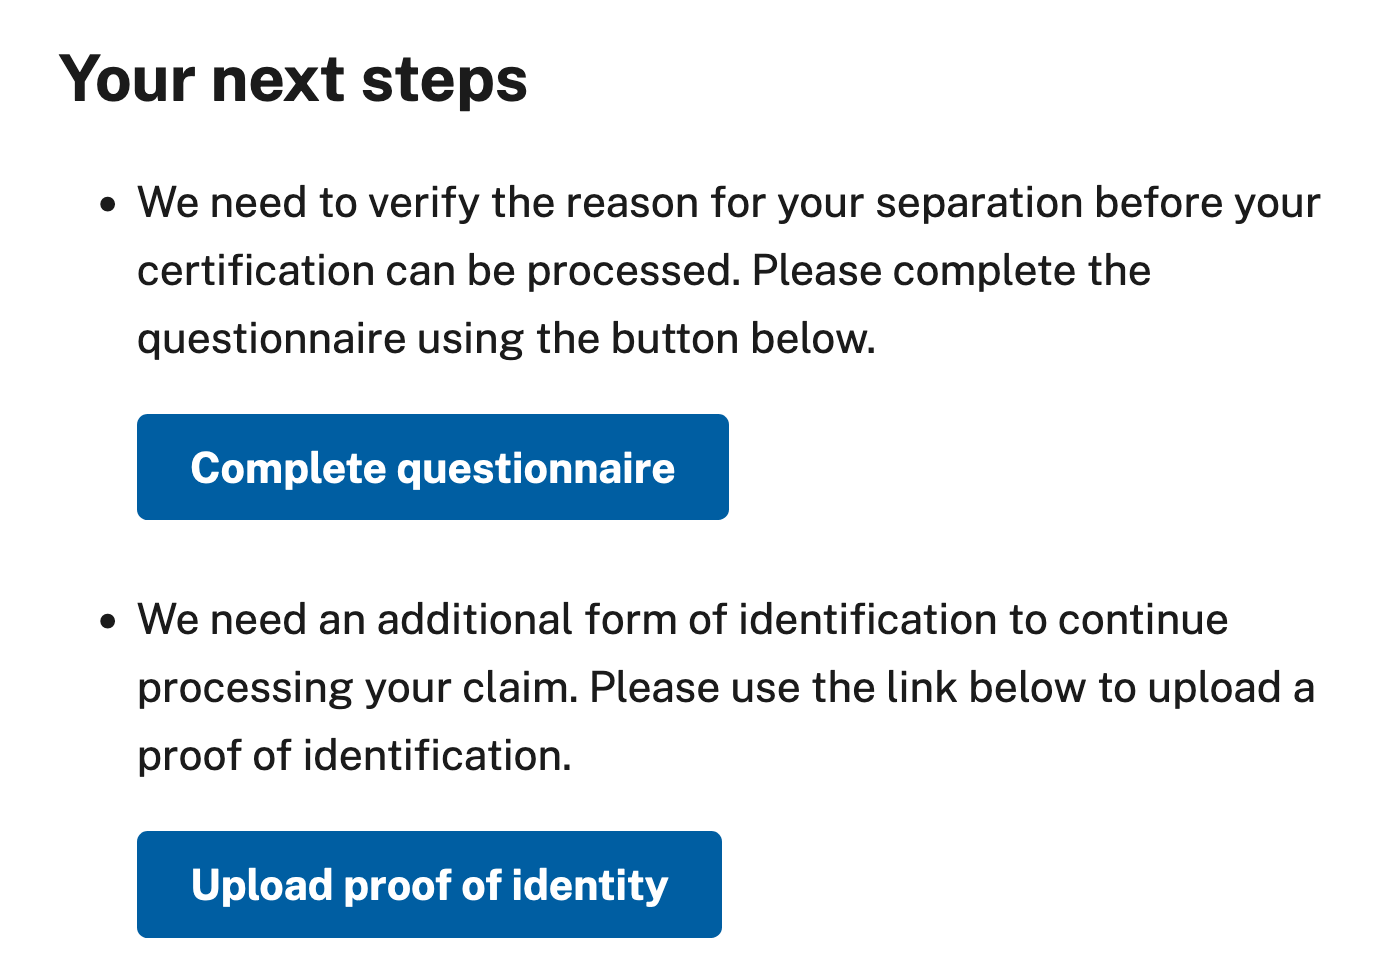 Screenshot of example text: "Header: Your next steps. Status: We need to verify the reason for your separation before your certification can be processed. Please complete the questionnaire using the button below. Button: Complete questionnaire Status: We need an additional form of identification to continue processing your claim. Please use the link below to upload a proof of identification. Button: Upload proof of identity"